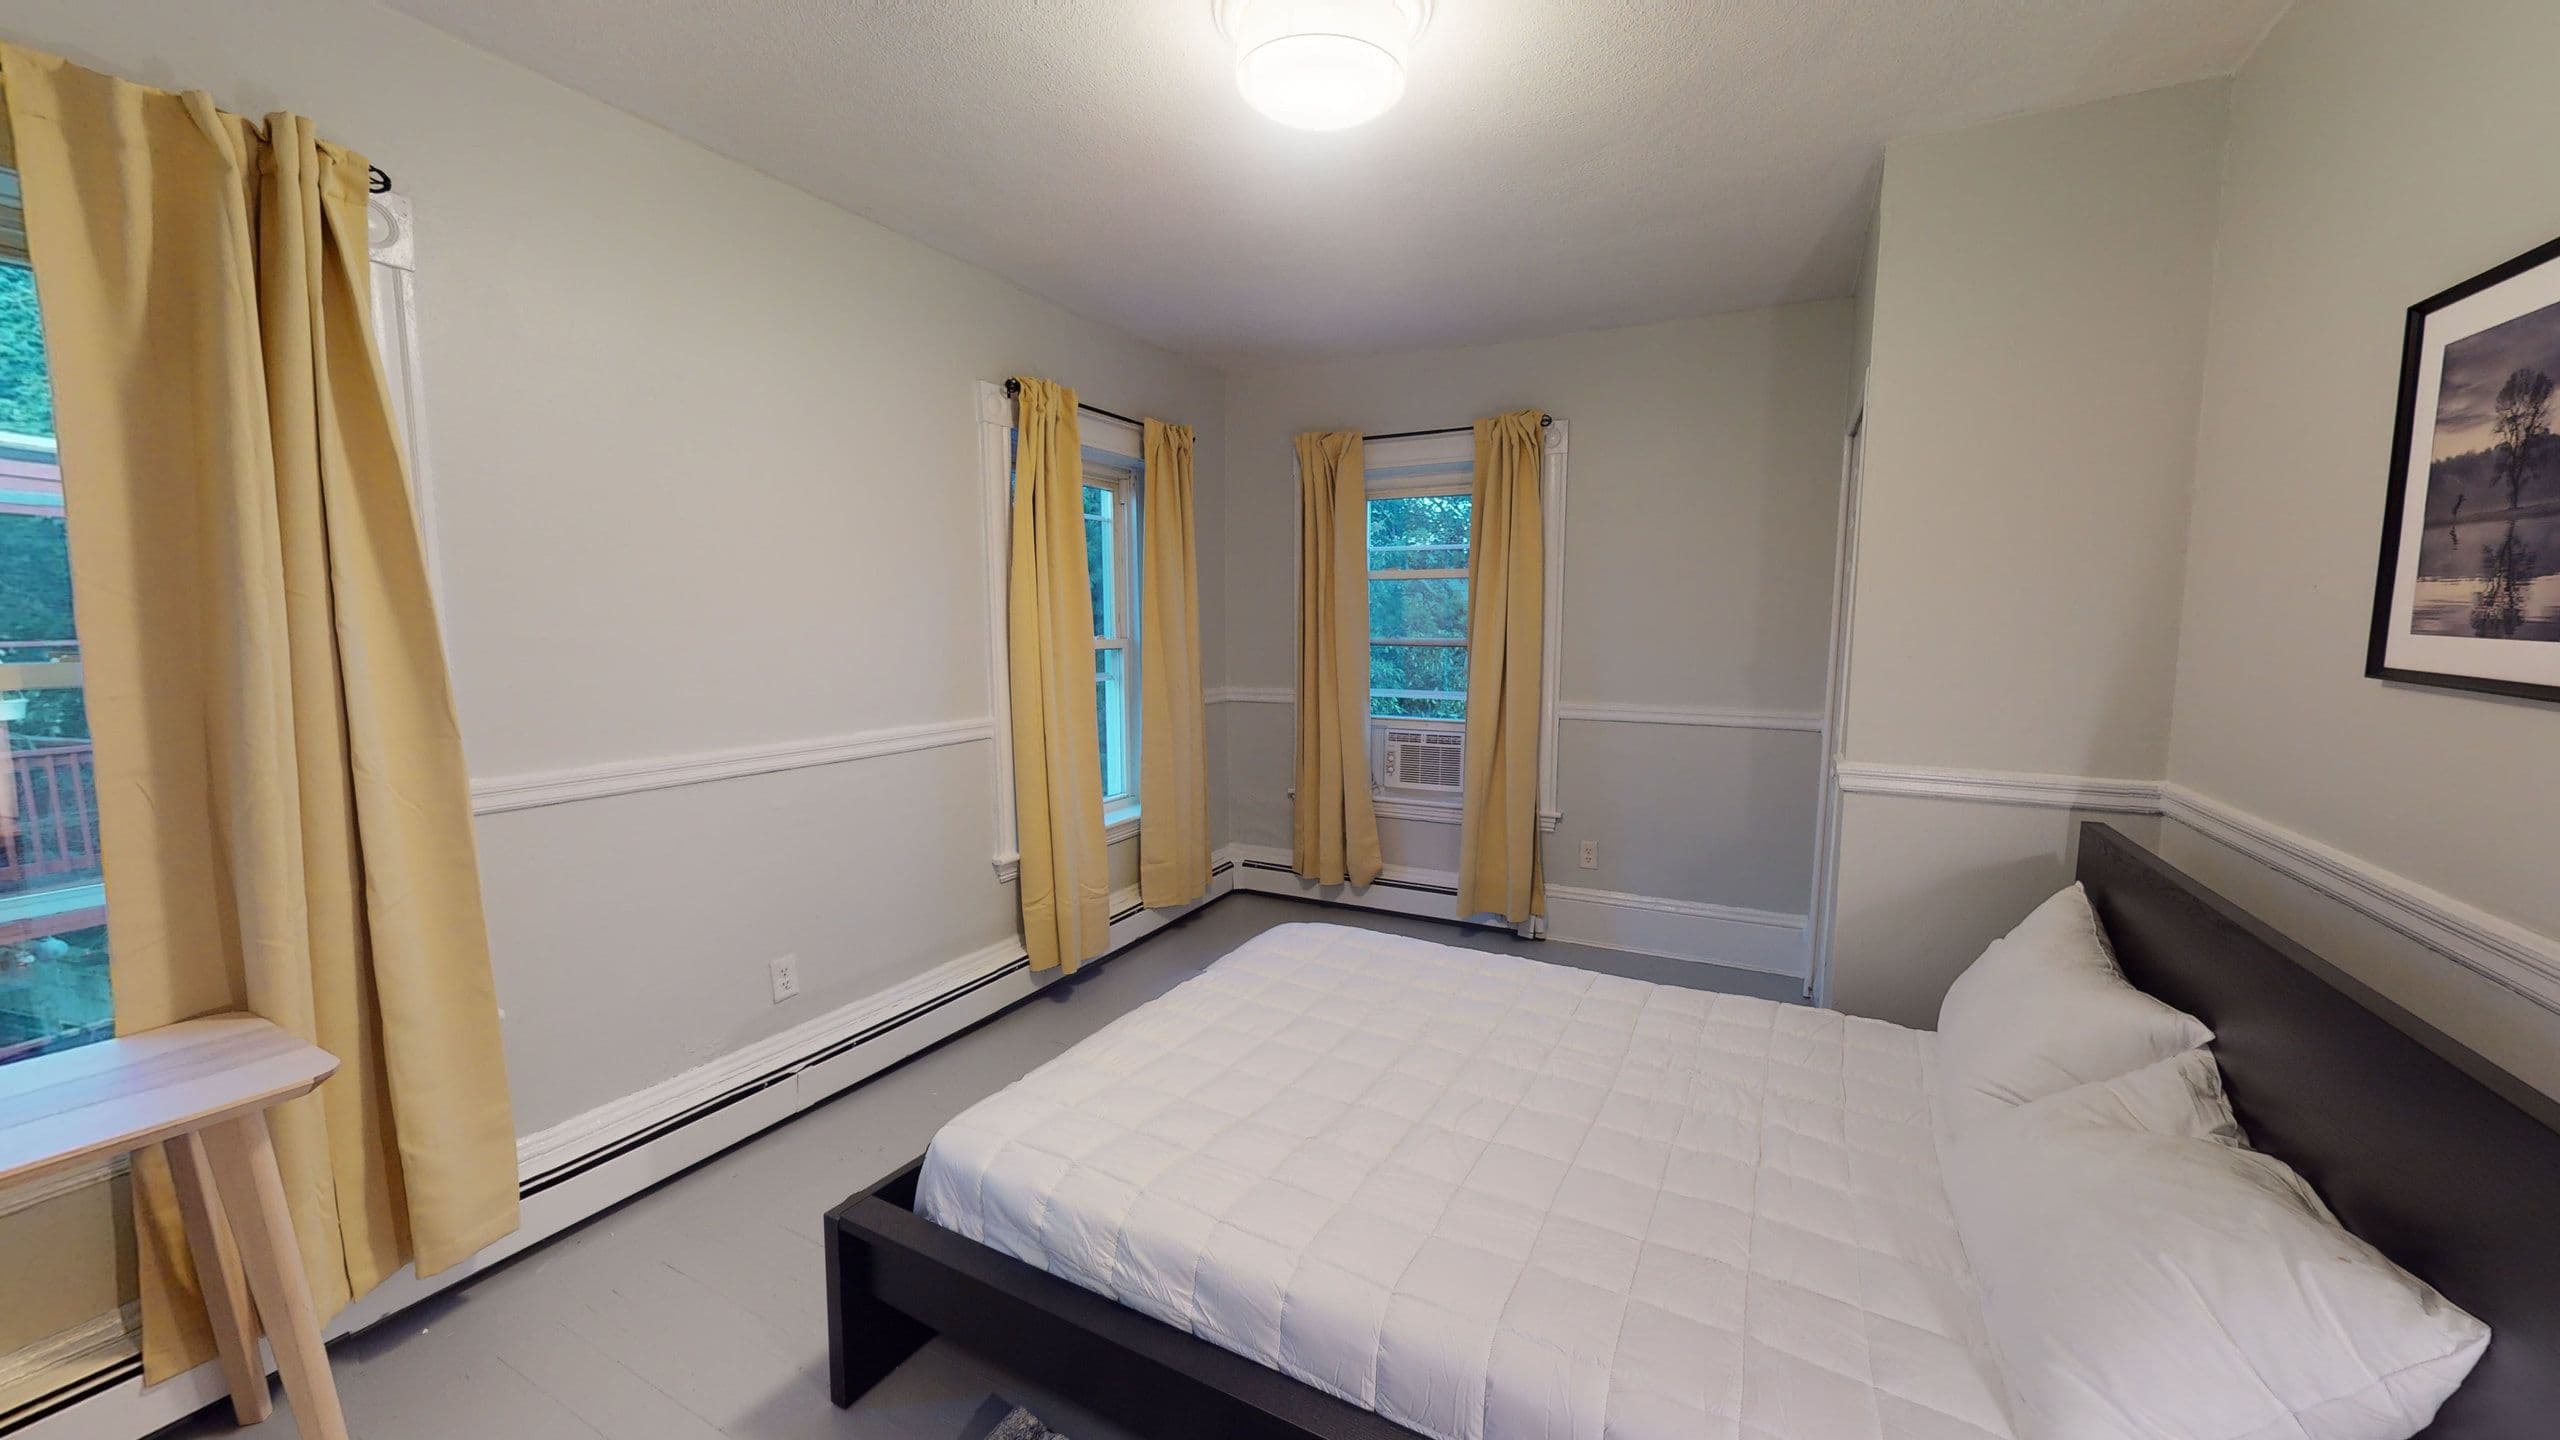 Photo 14 of #1359: Queen Bedroom A at June Homes